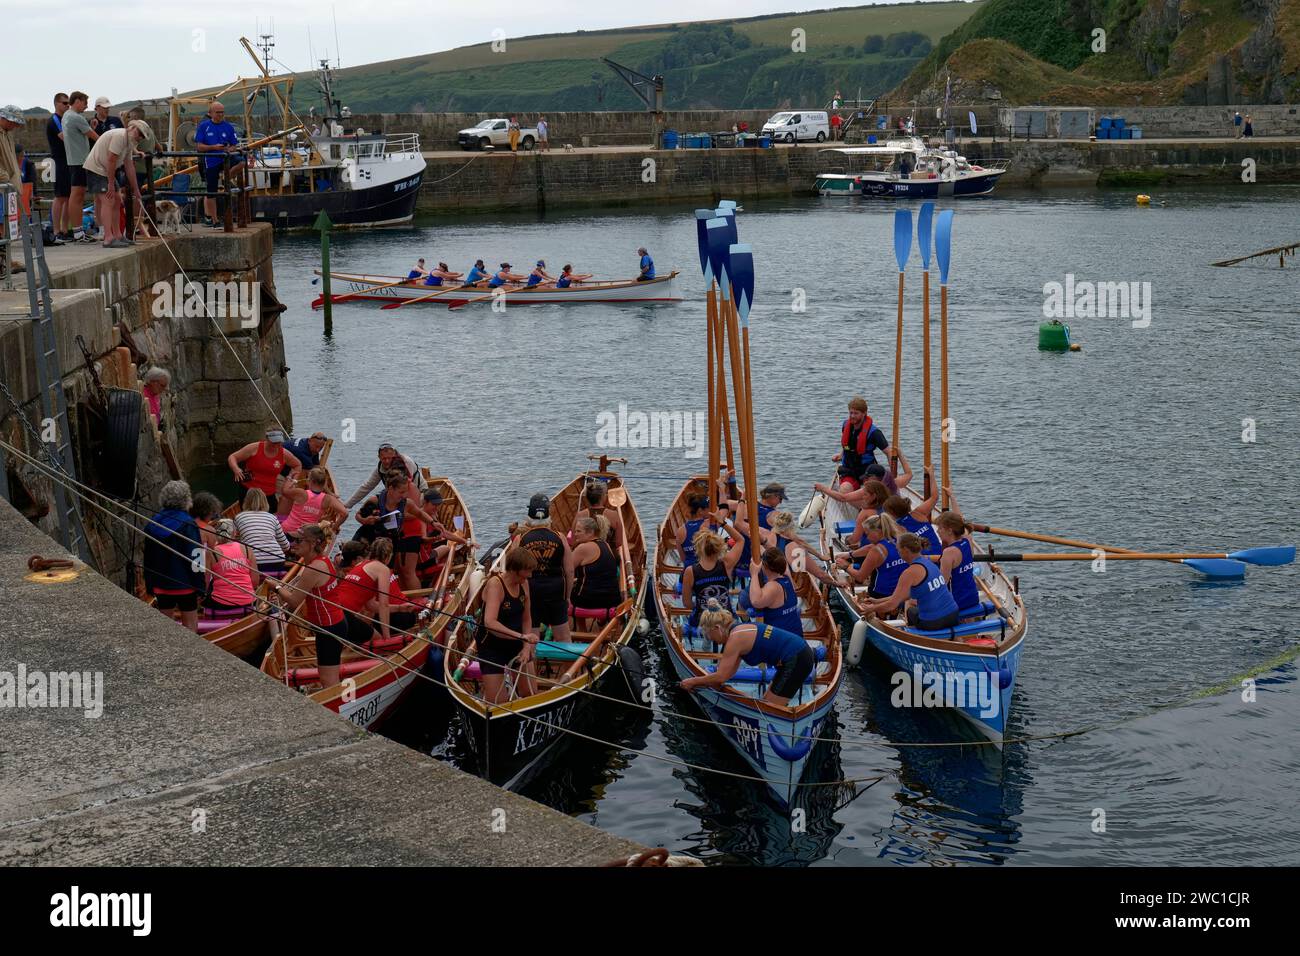 crews get ready on their boats for  ladies pilot gig racing at the regatta ,Mevagissey, Cornwall,England,Uk Stock Photo